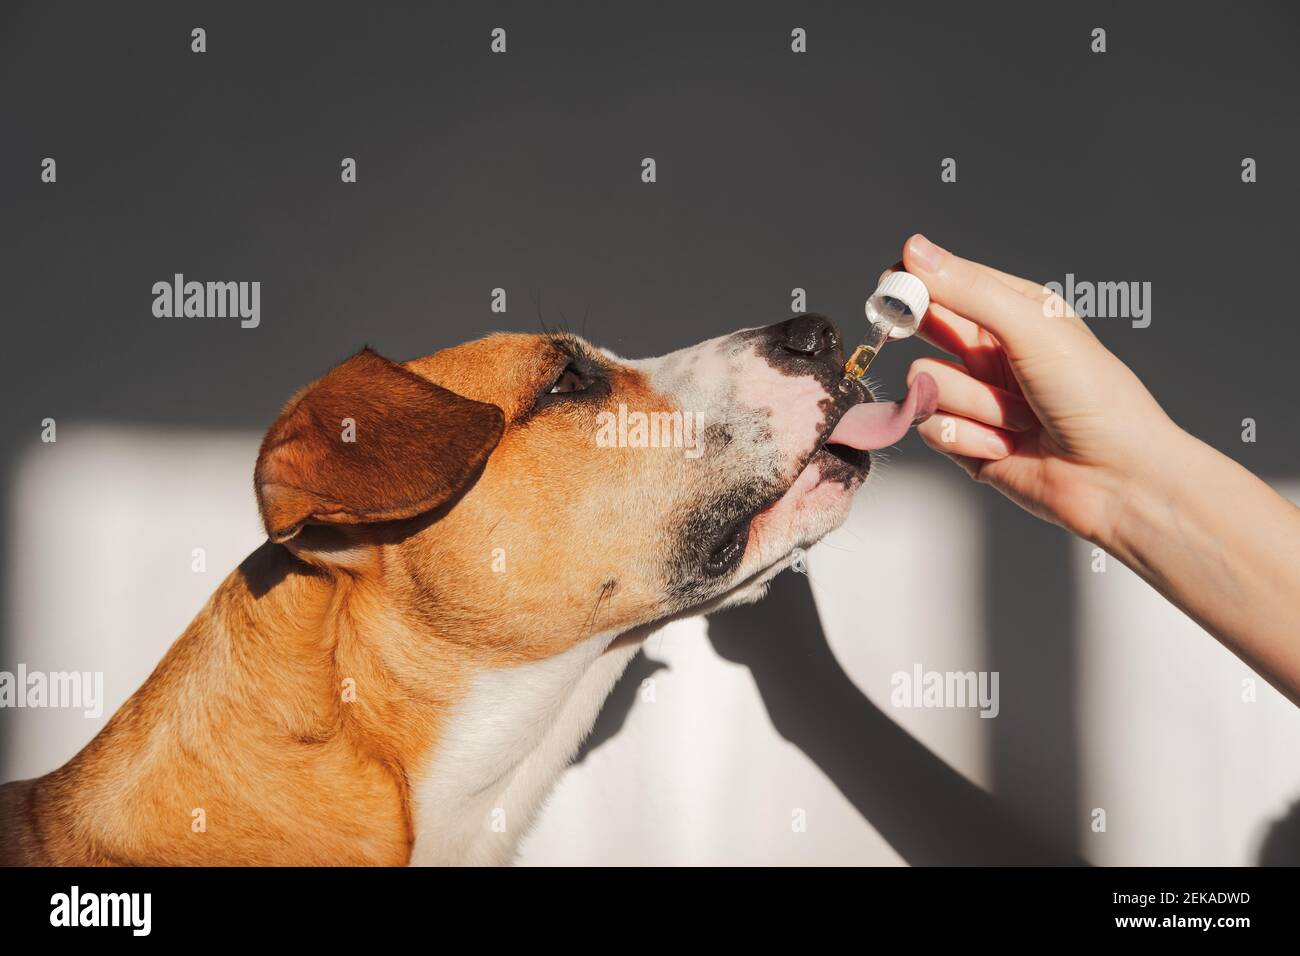 Dog taking essential oil from dropper. Nutritional supplements, calming products, cbd or thd oils for pets Stock Photo